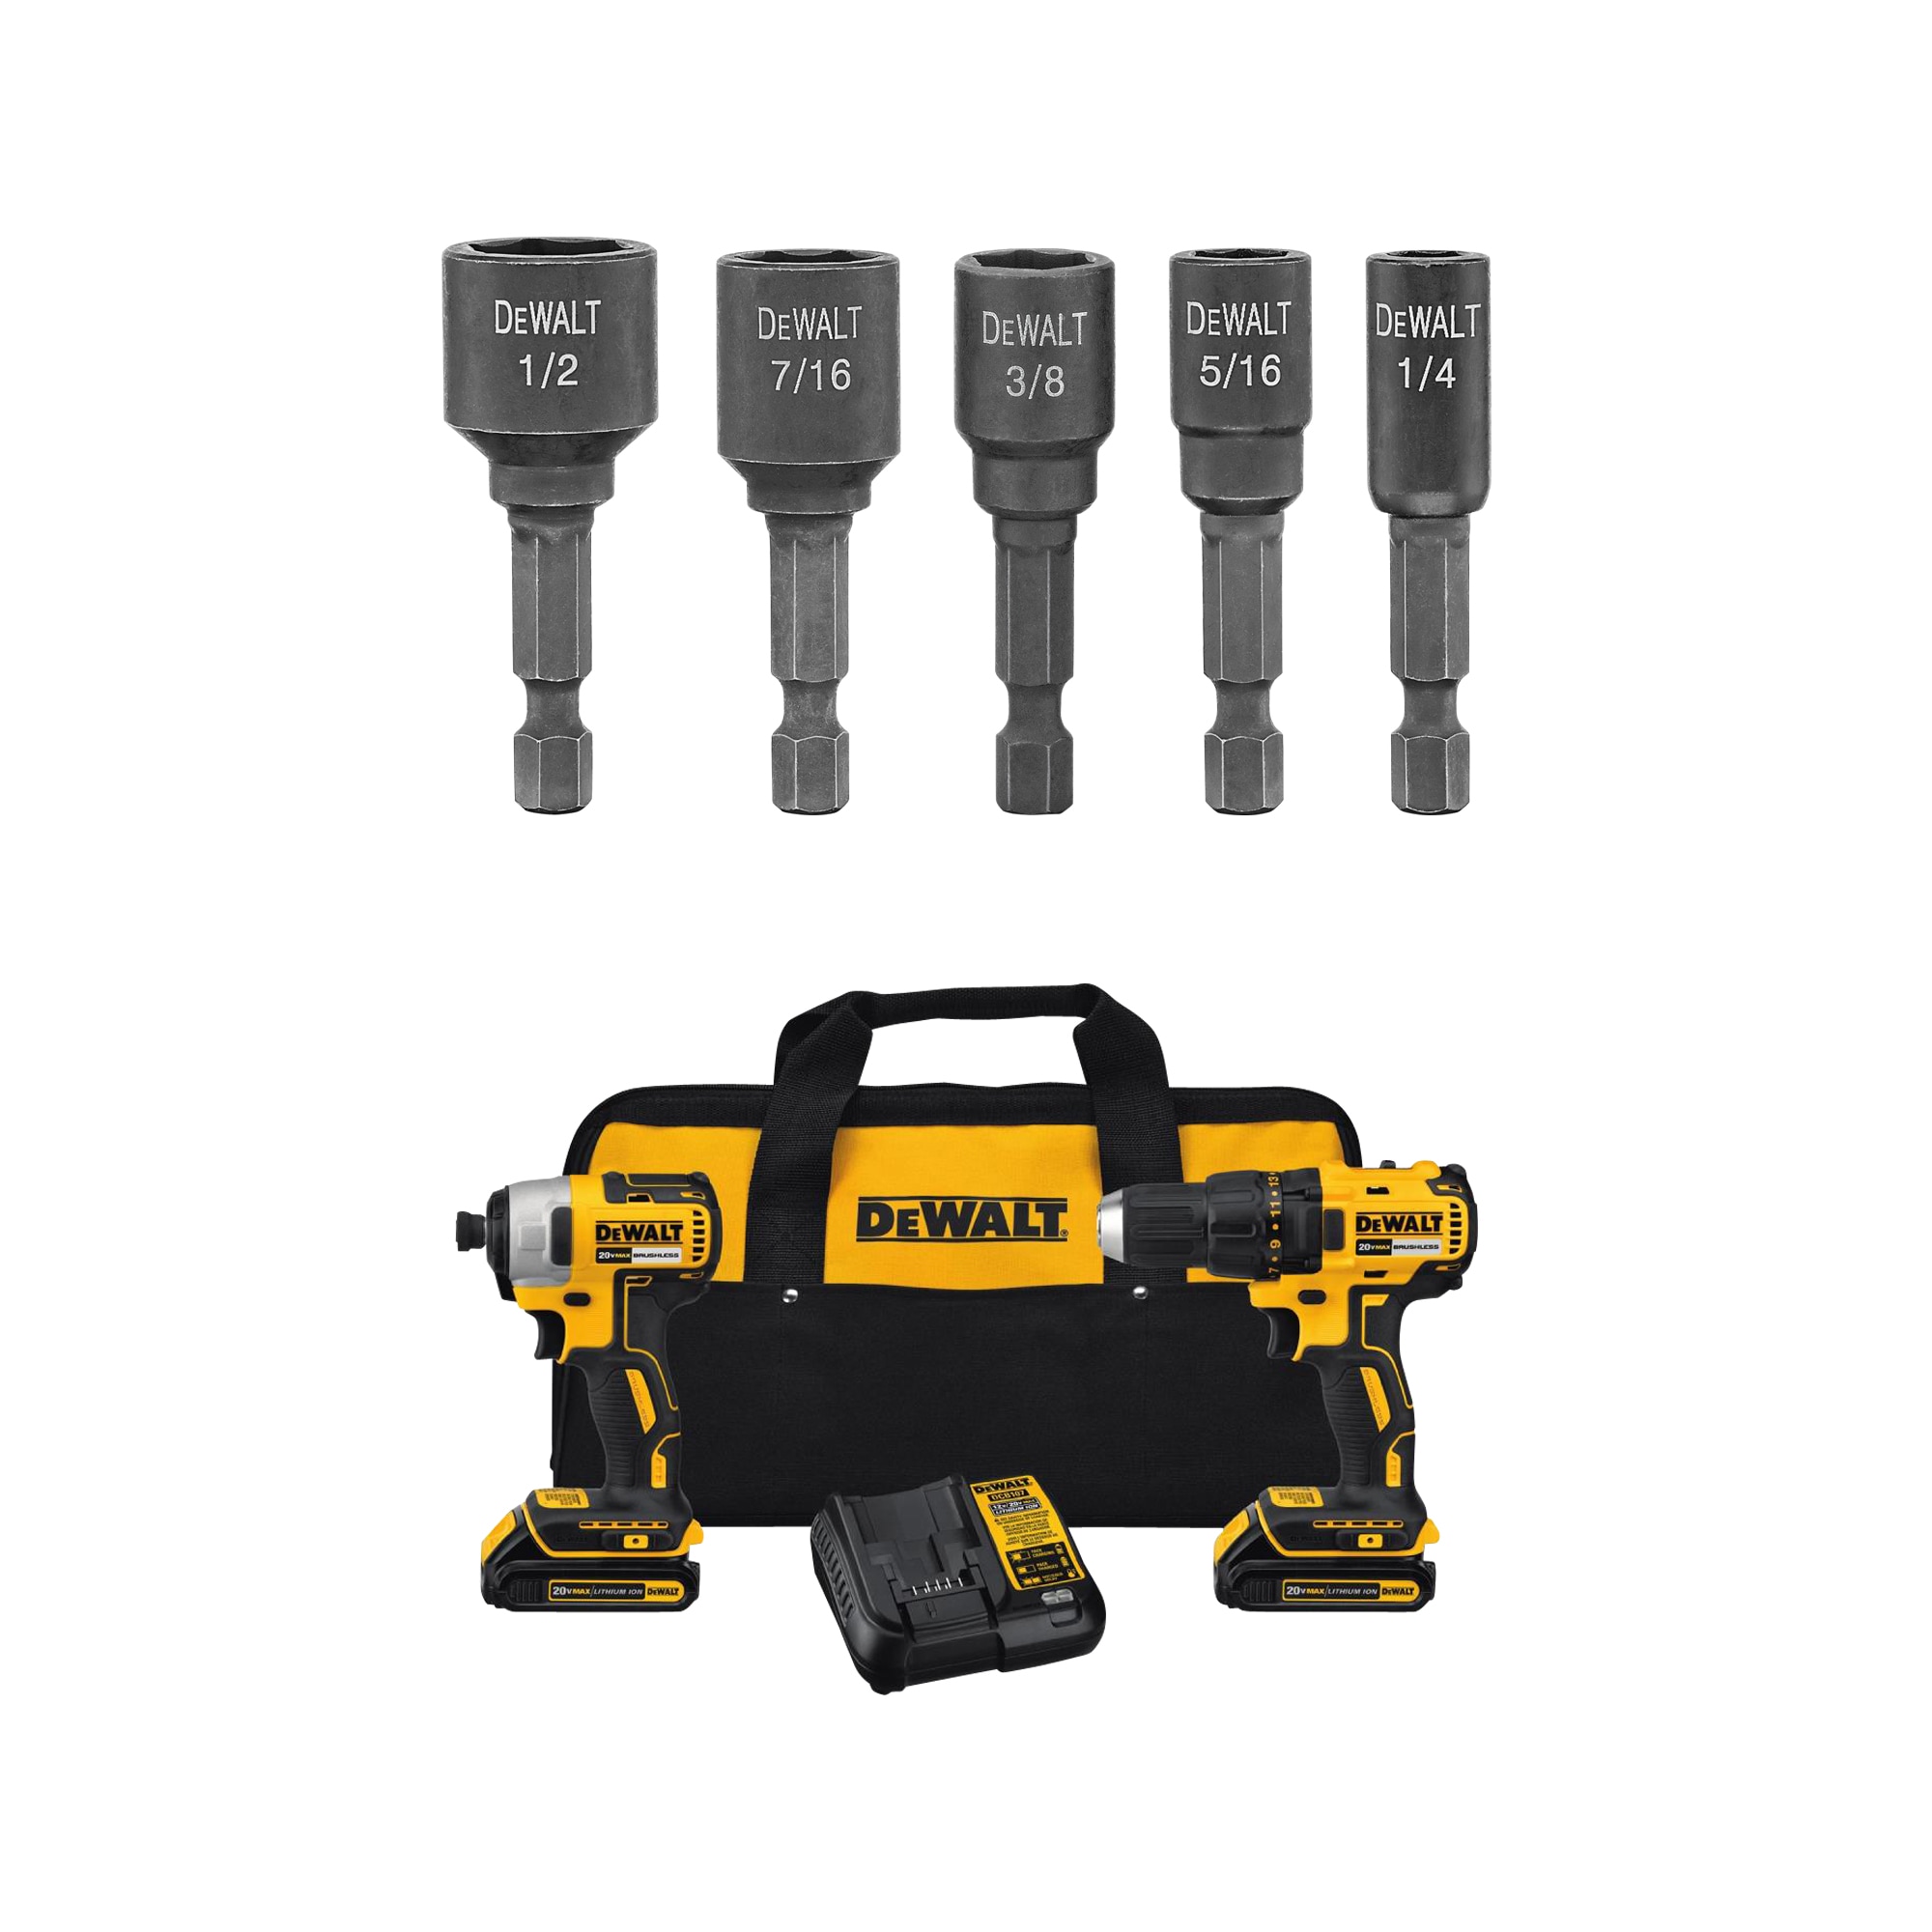 DEWALT 2-Tool 20-Volt Max Brushless Power Tool Combo Kit with Soft Case (2-Batteries and charger Included) & Impact Ready 5-Piece Set Nutsetter